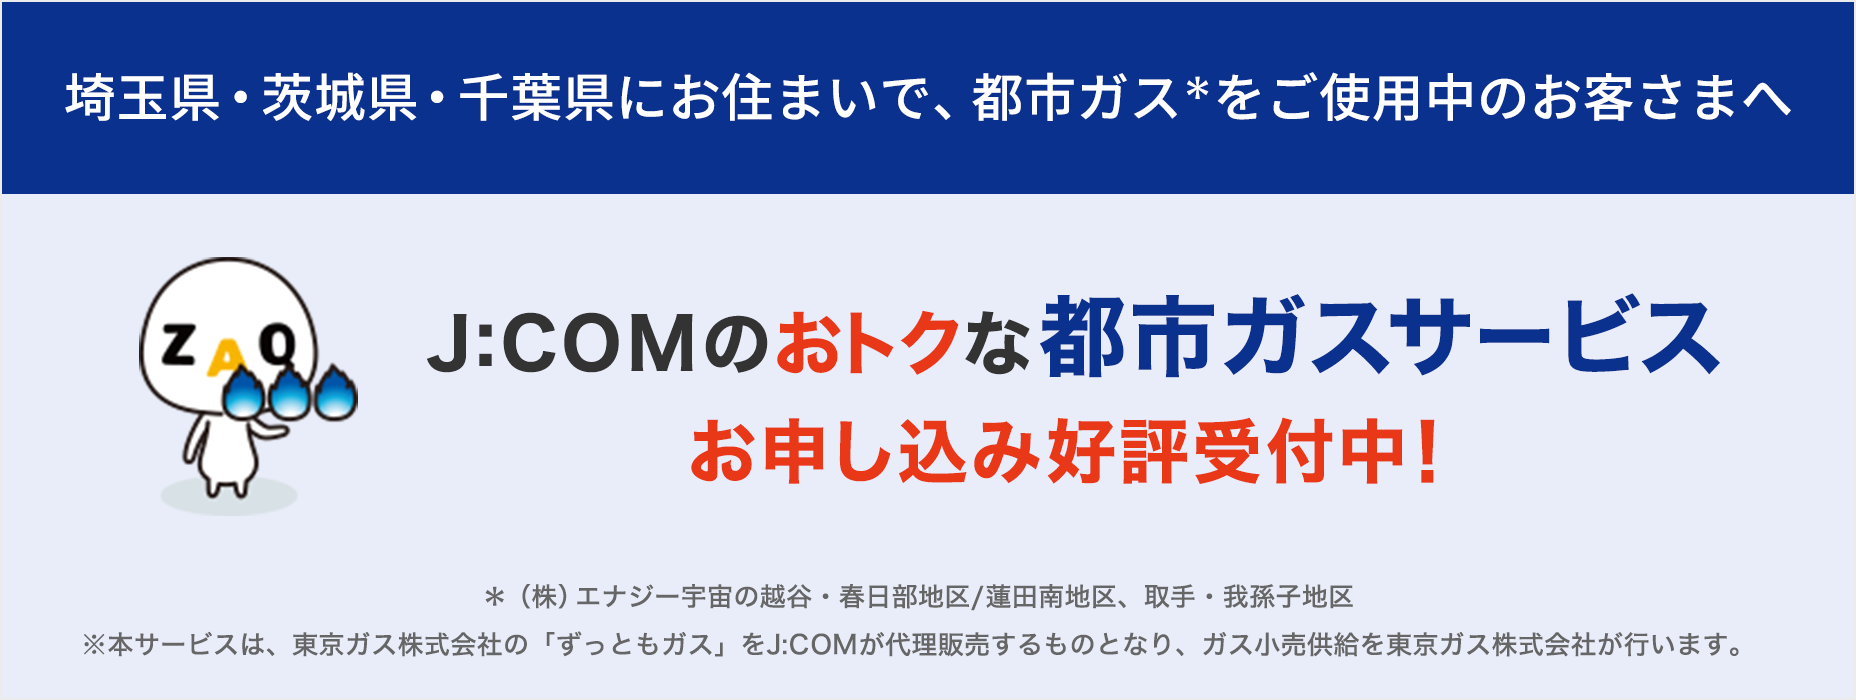 For customers using city gas in the Koshigaya/Kasukabe area/Hasuda Minami area, we are now accepting applications for J:COM 's advantageous city gas service!